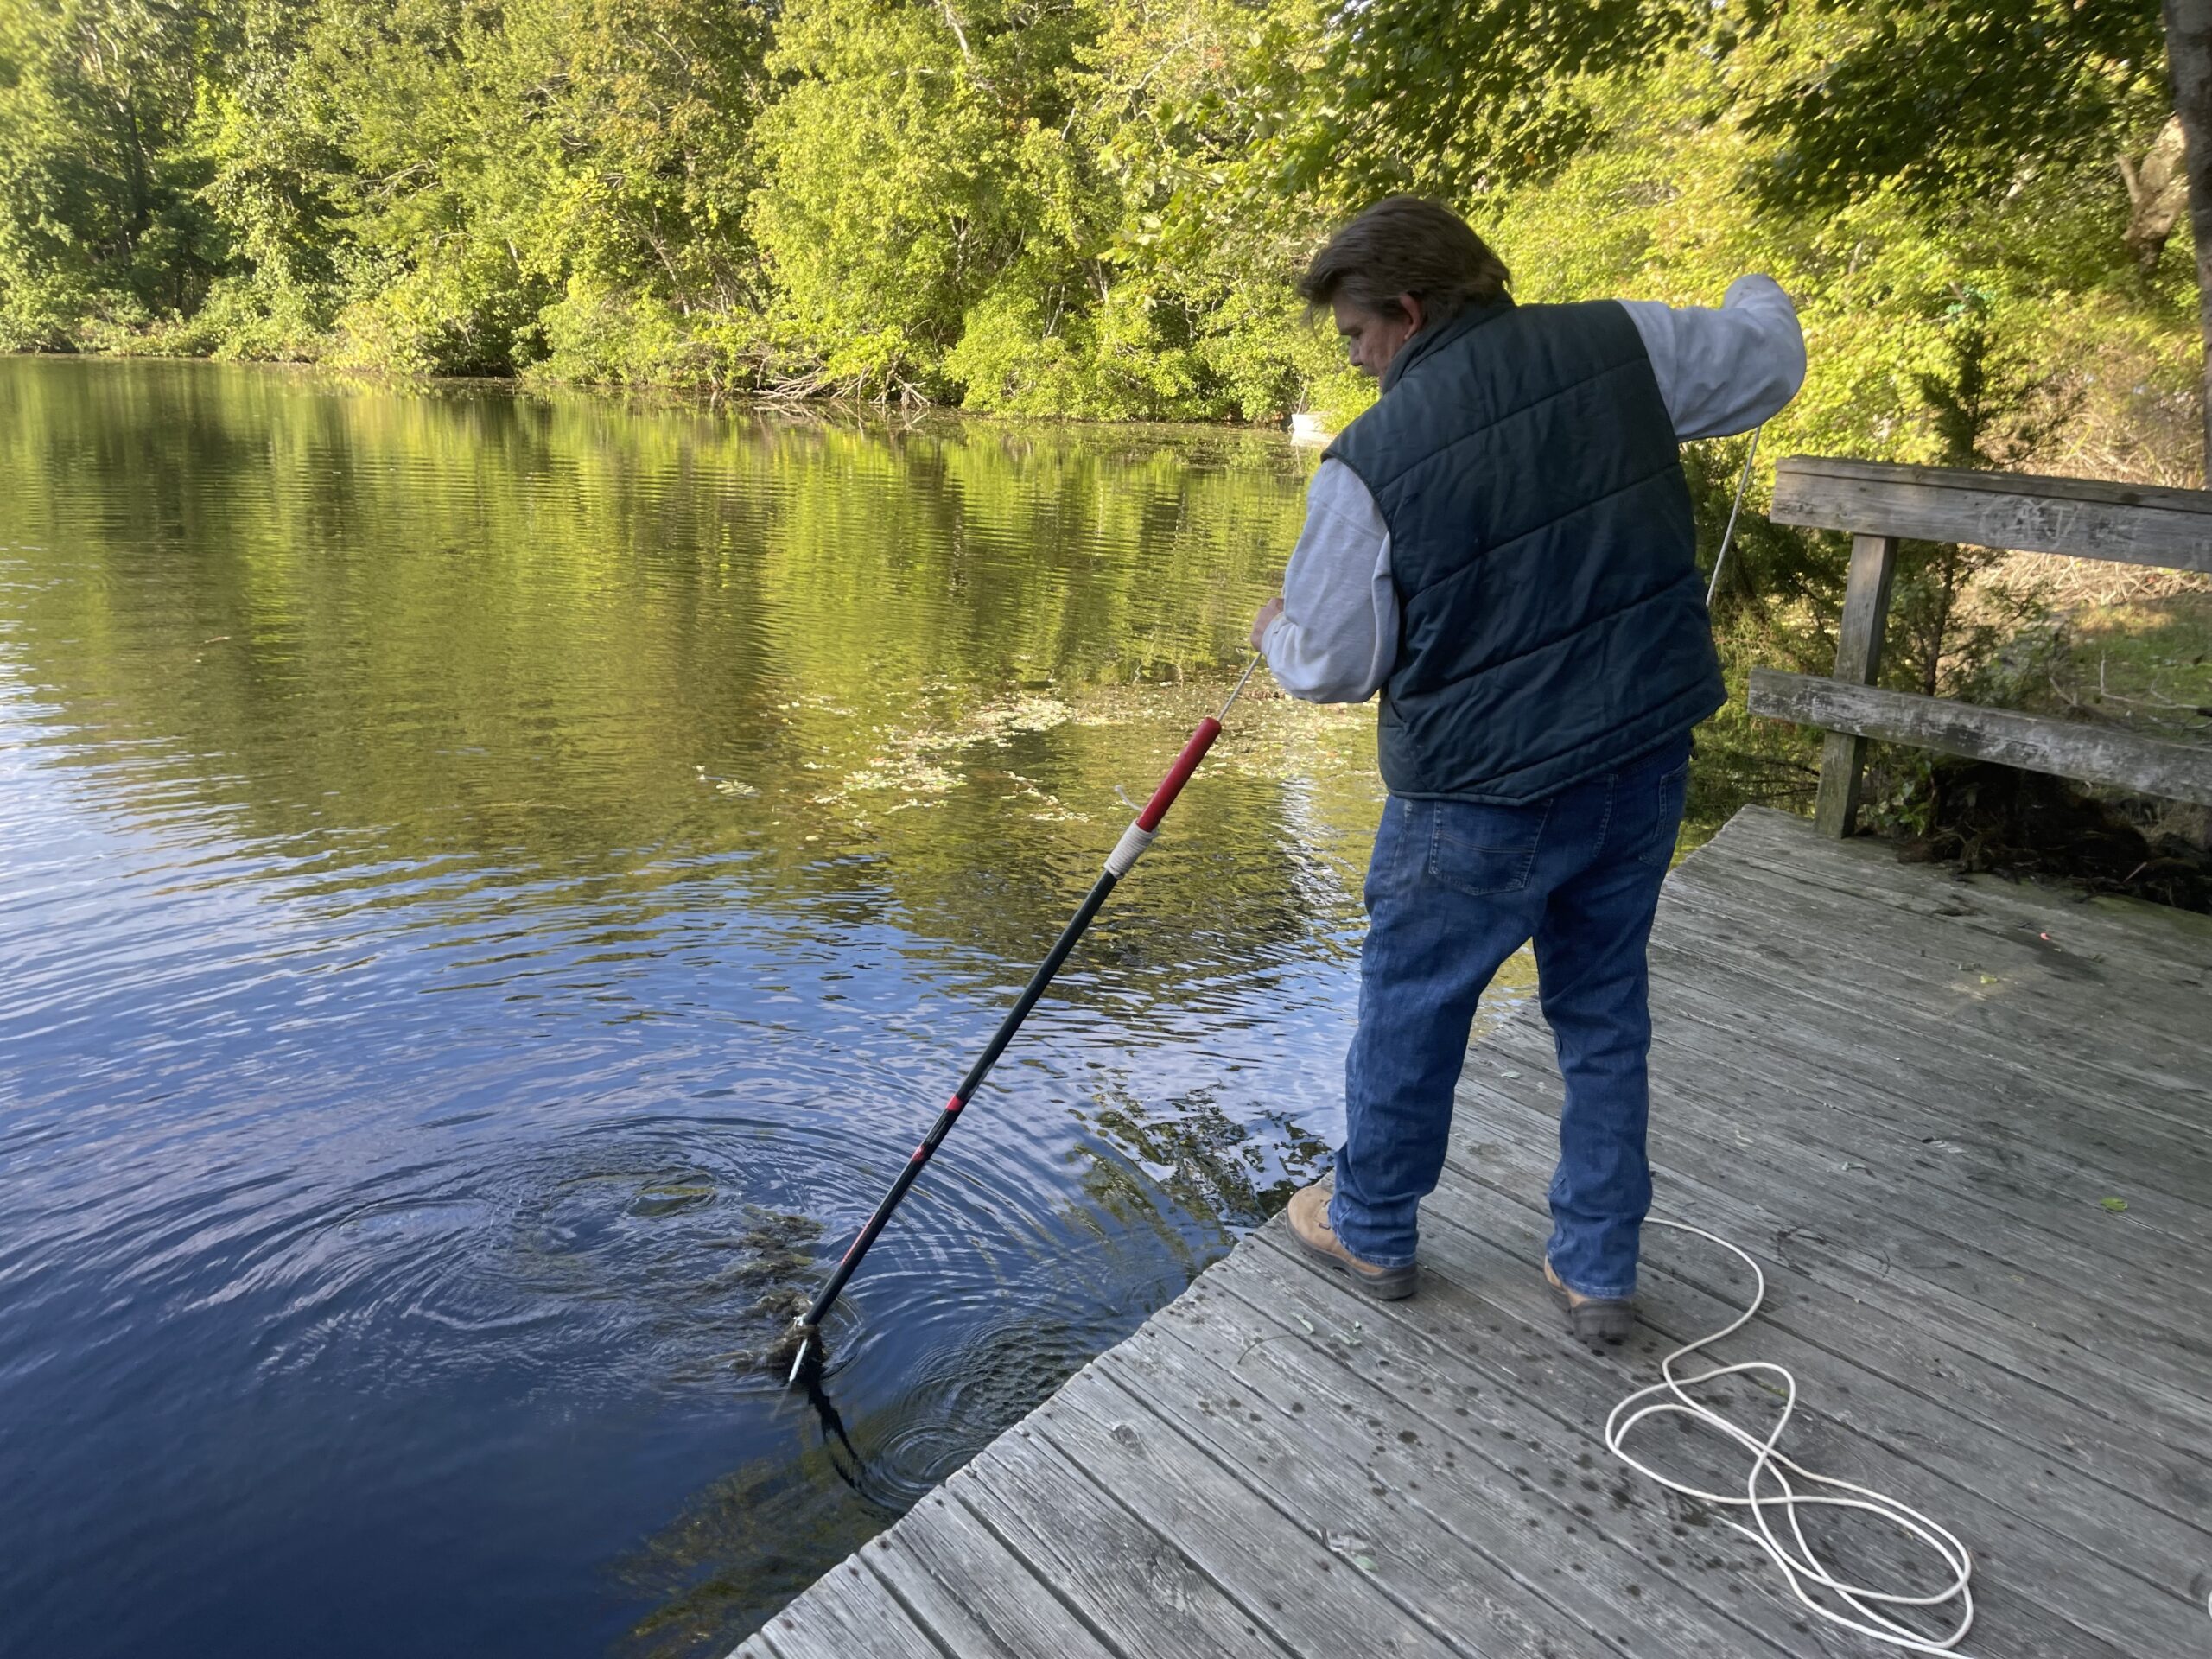 Town Councilman Tommy John Schiavoni lent a hand during the cleanup of Trout Pond in Noyac on September 24.    DIANE HEWETT